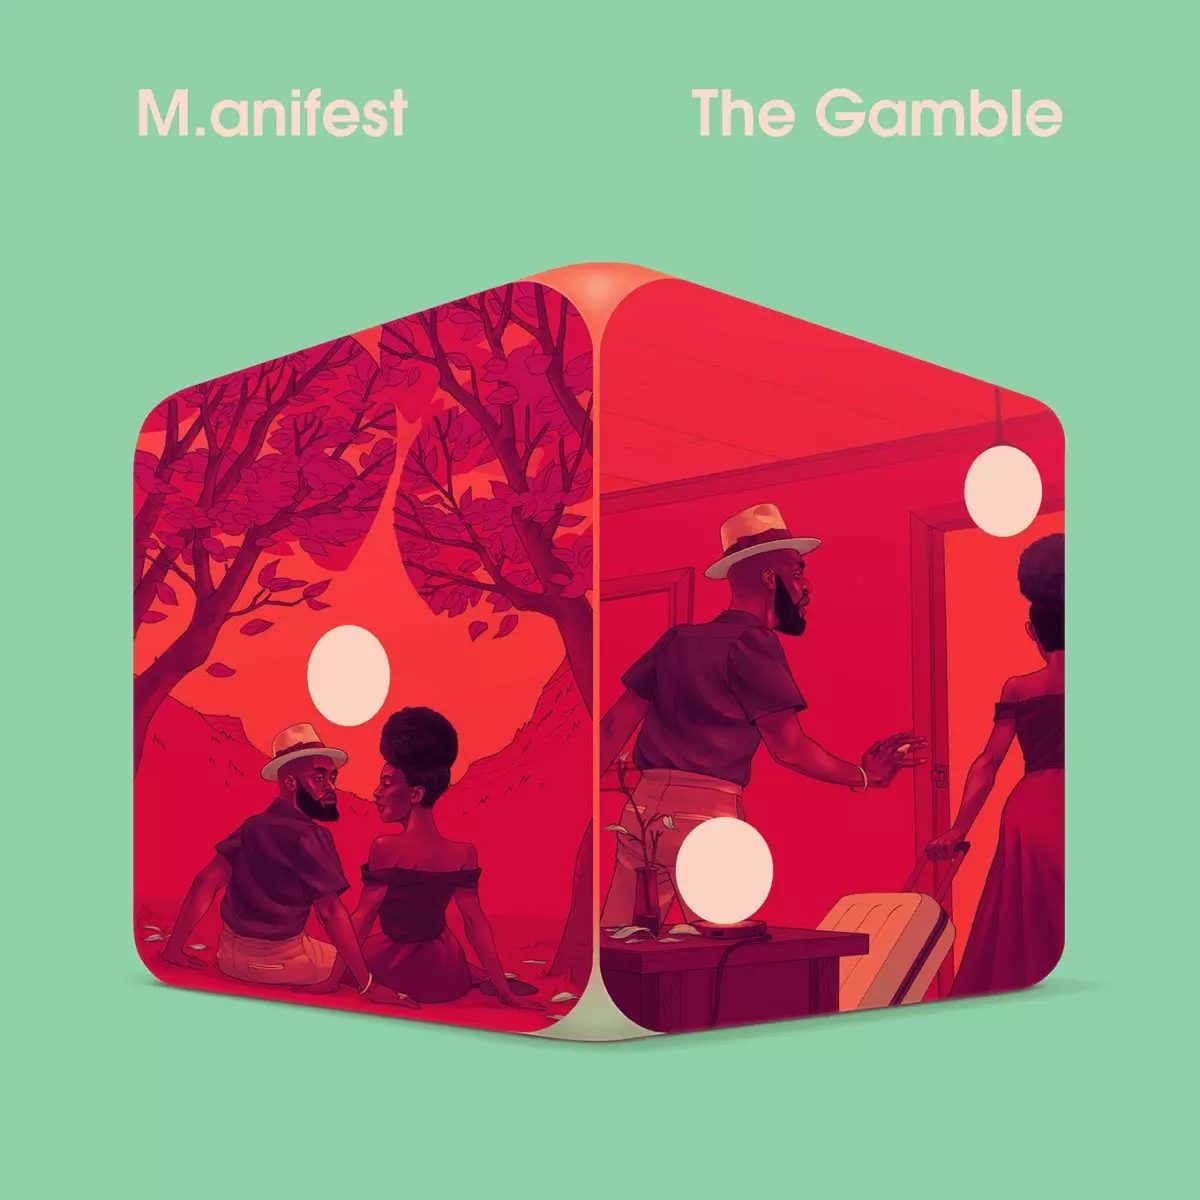 The Gamble by M.anifest on Apple Music